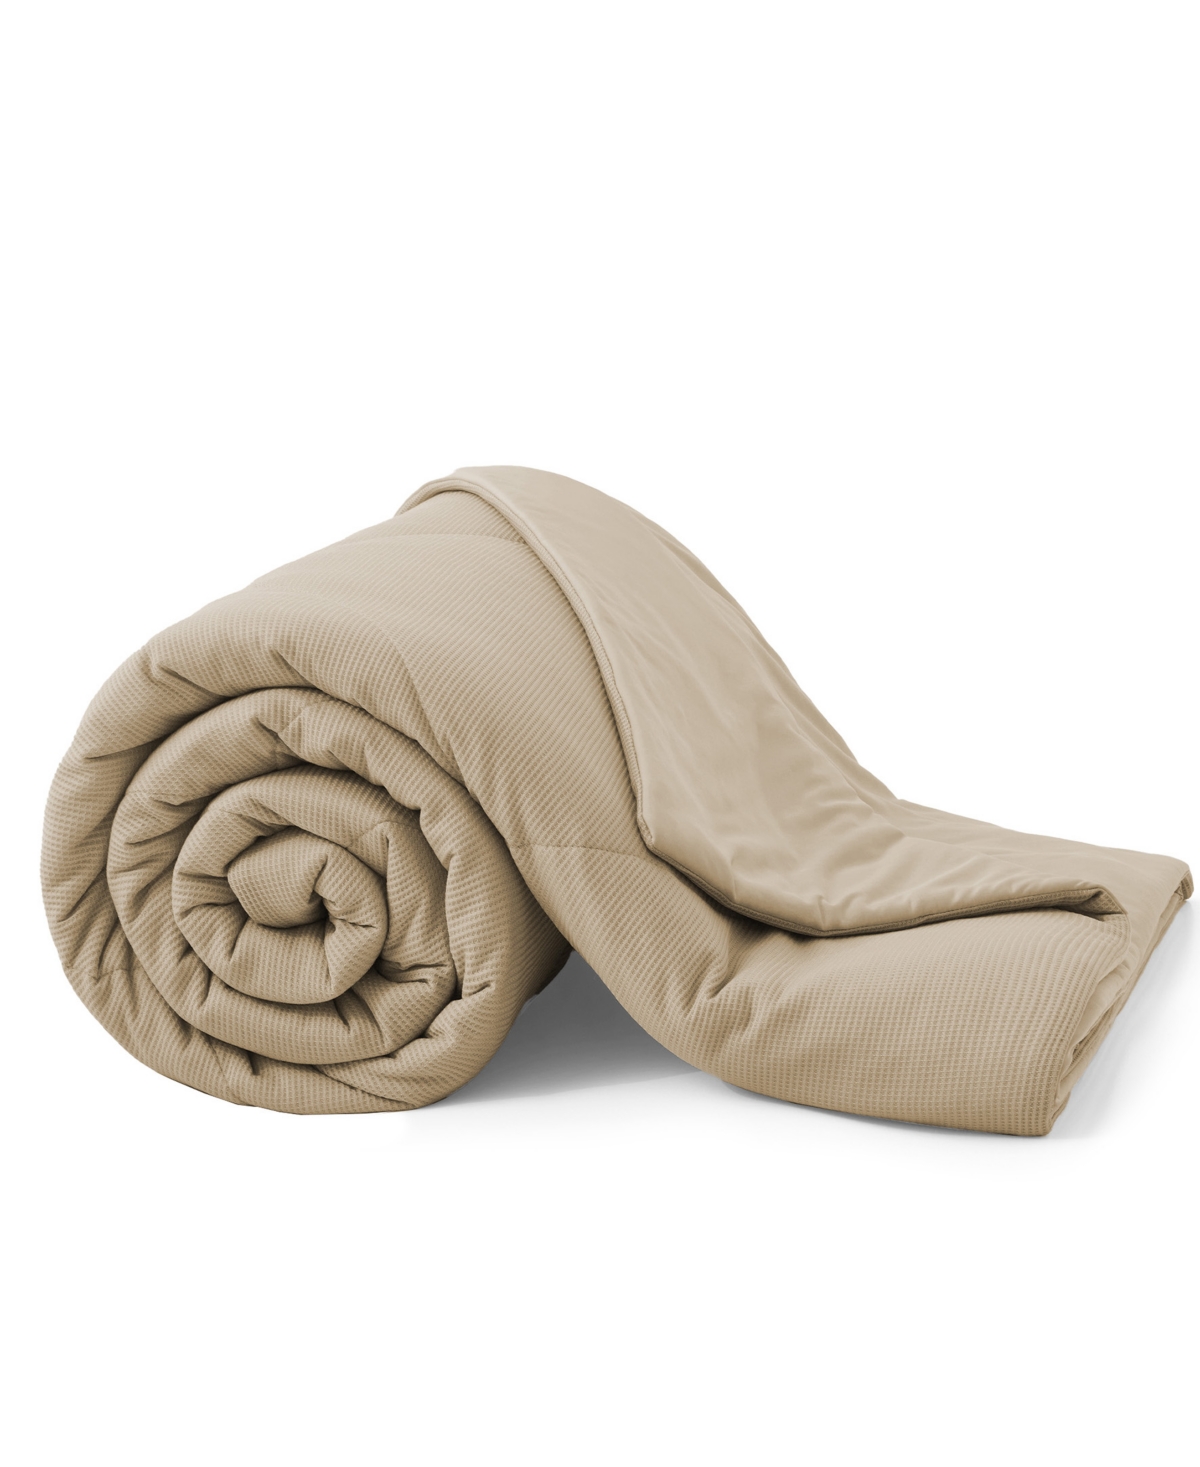 Unikome Year Ultra Soft Round Reversible Cooling Blanket With Waffle Design, Twin In Khaki